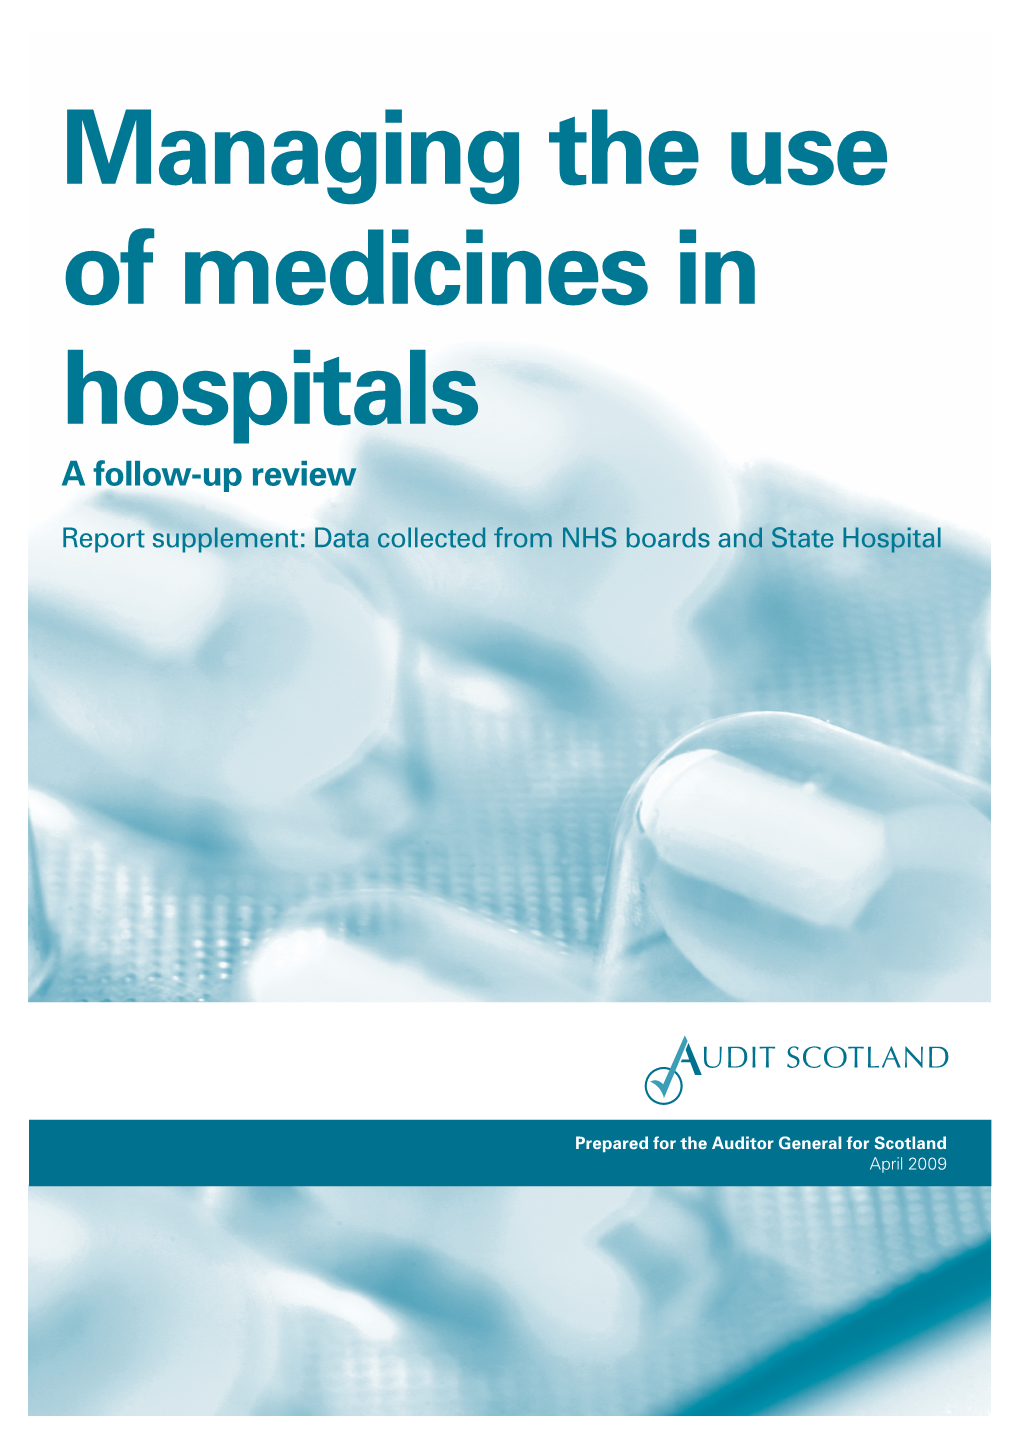 Managing the Use of Medicines in Hospitals a Follow-Up Review